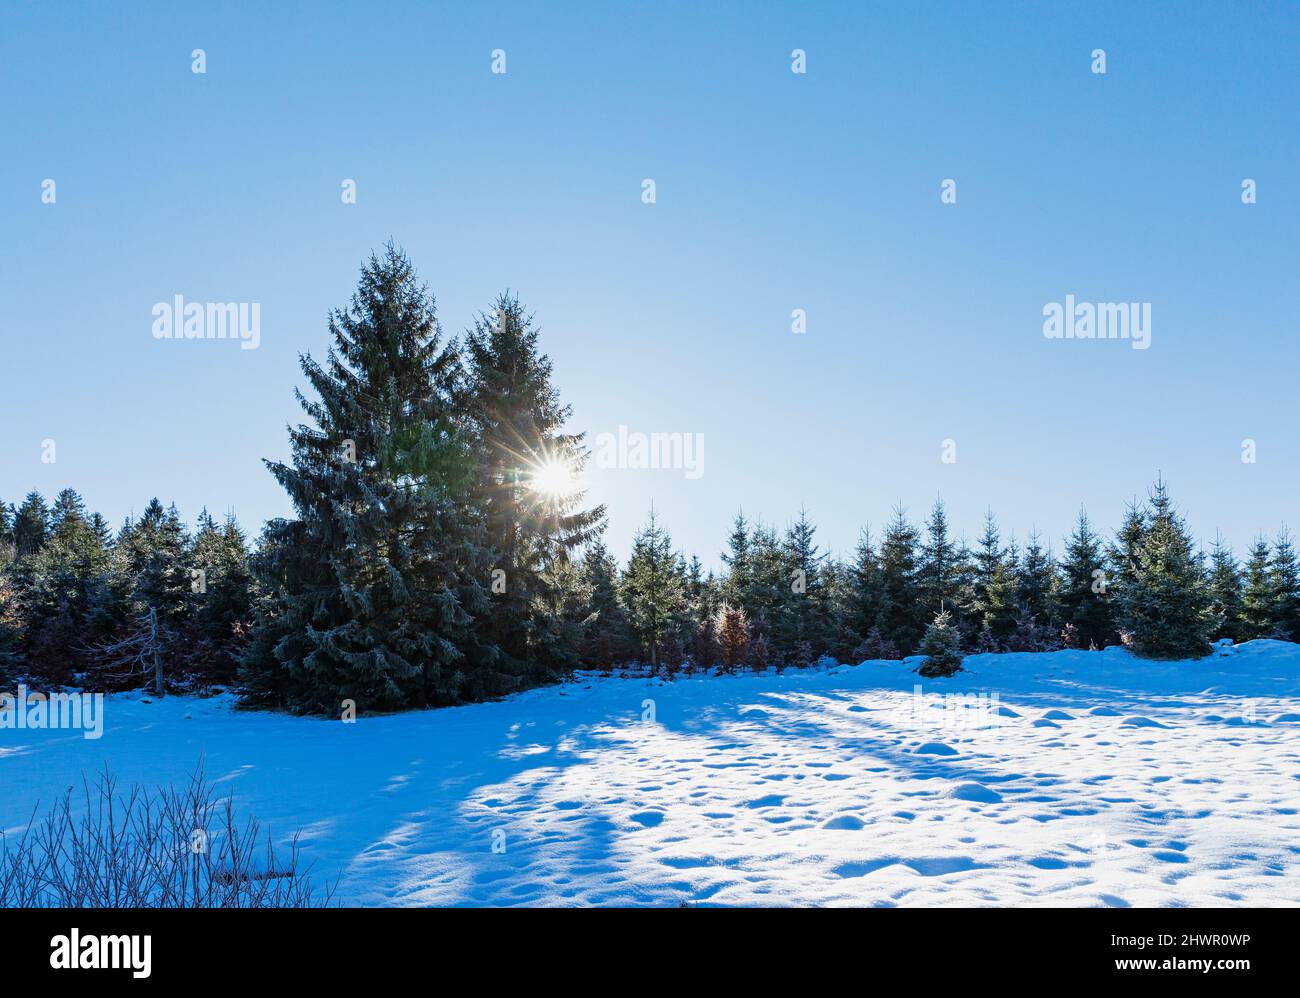 Snowy landscape of Perlenbach-Fuhrtsbachtal nature reserve on sunny day Stock Photo